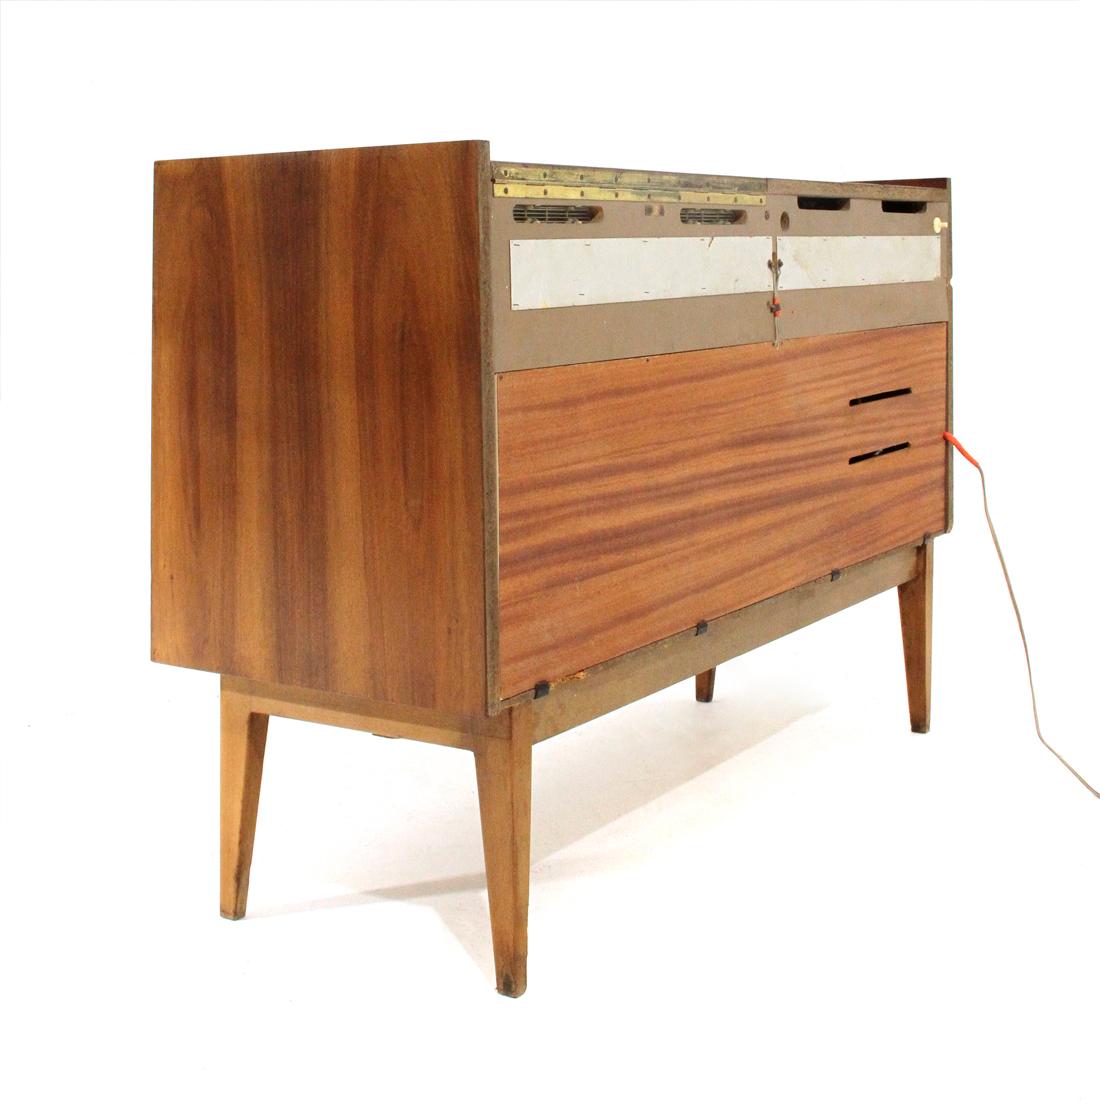 Stereo cabinet produced by Grundig in the 1950s.
Structure in teak veneered wood.
Radio with Lw, Mw, Kw, Ukw frequencies.
Turntable compartment with disc holder and light.
Auxiliary output.
All is working.
Audio speaker net replaced.
Good